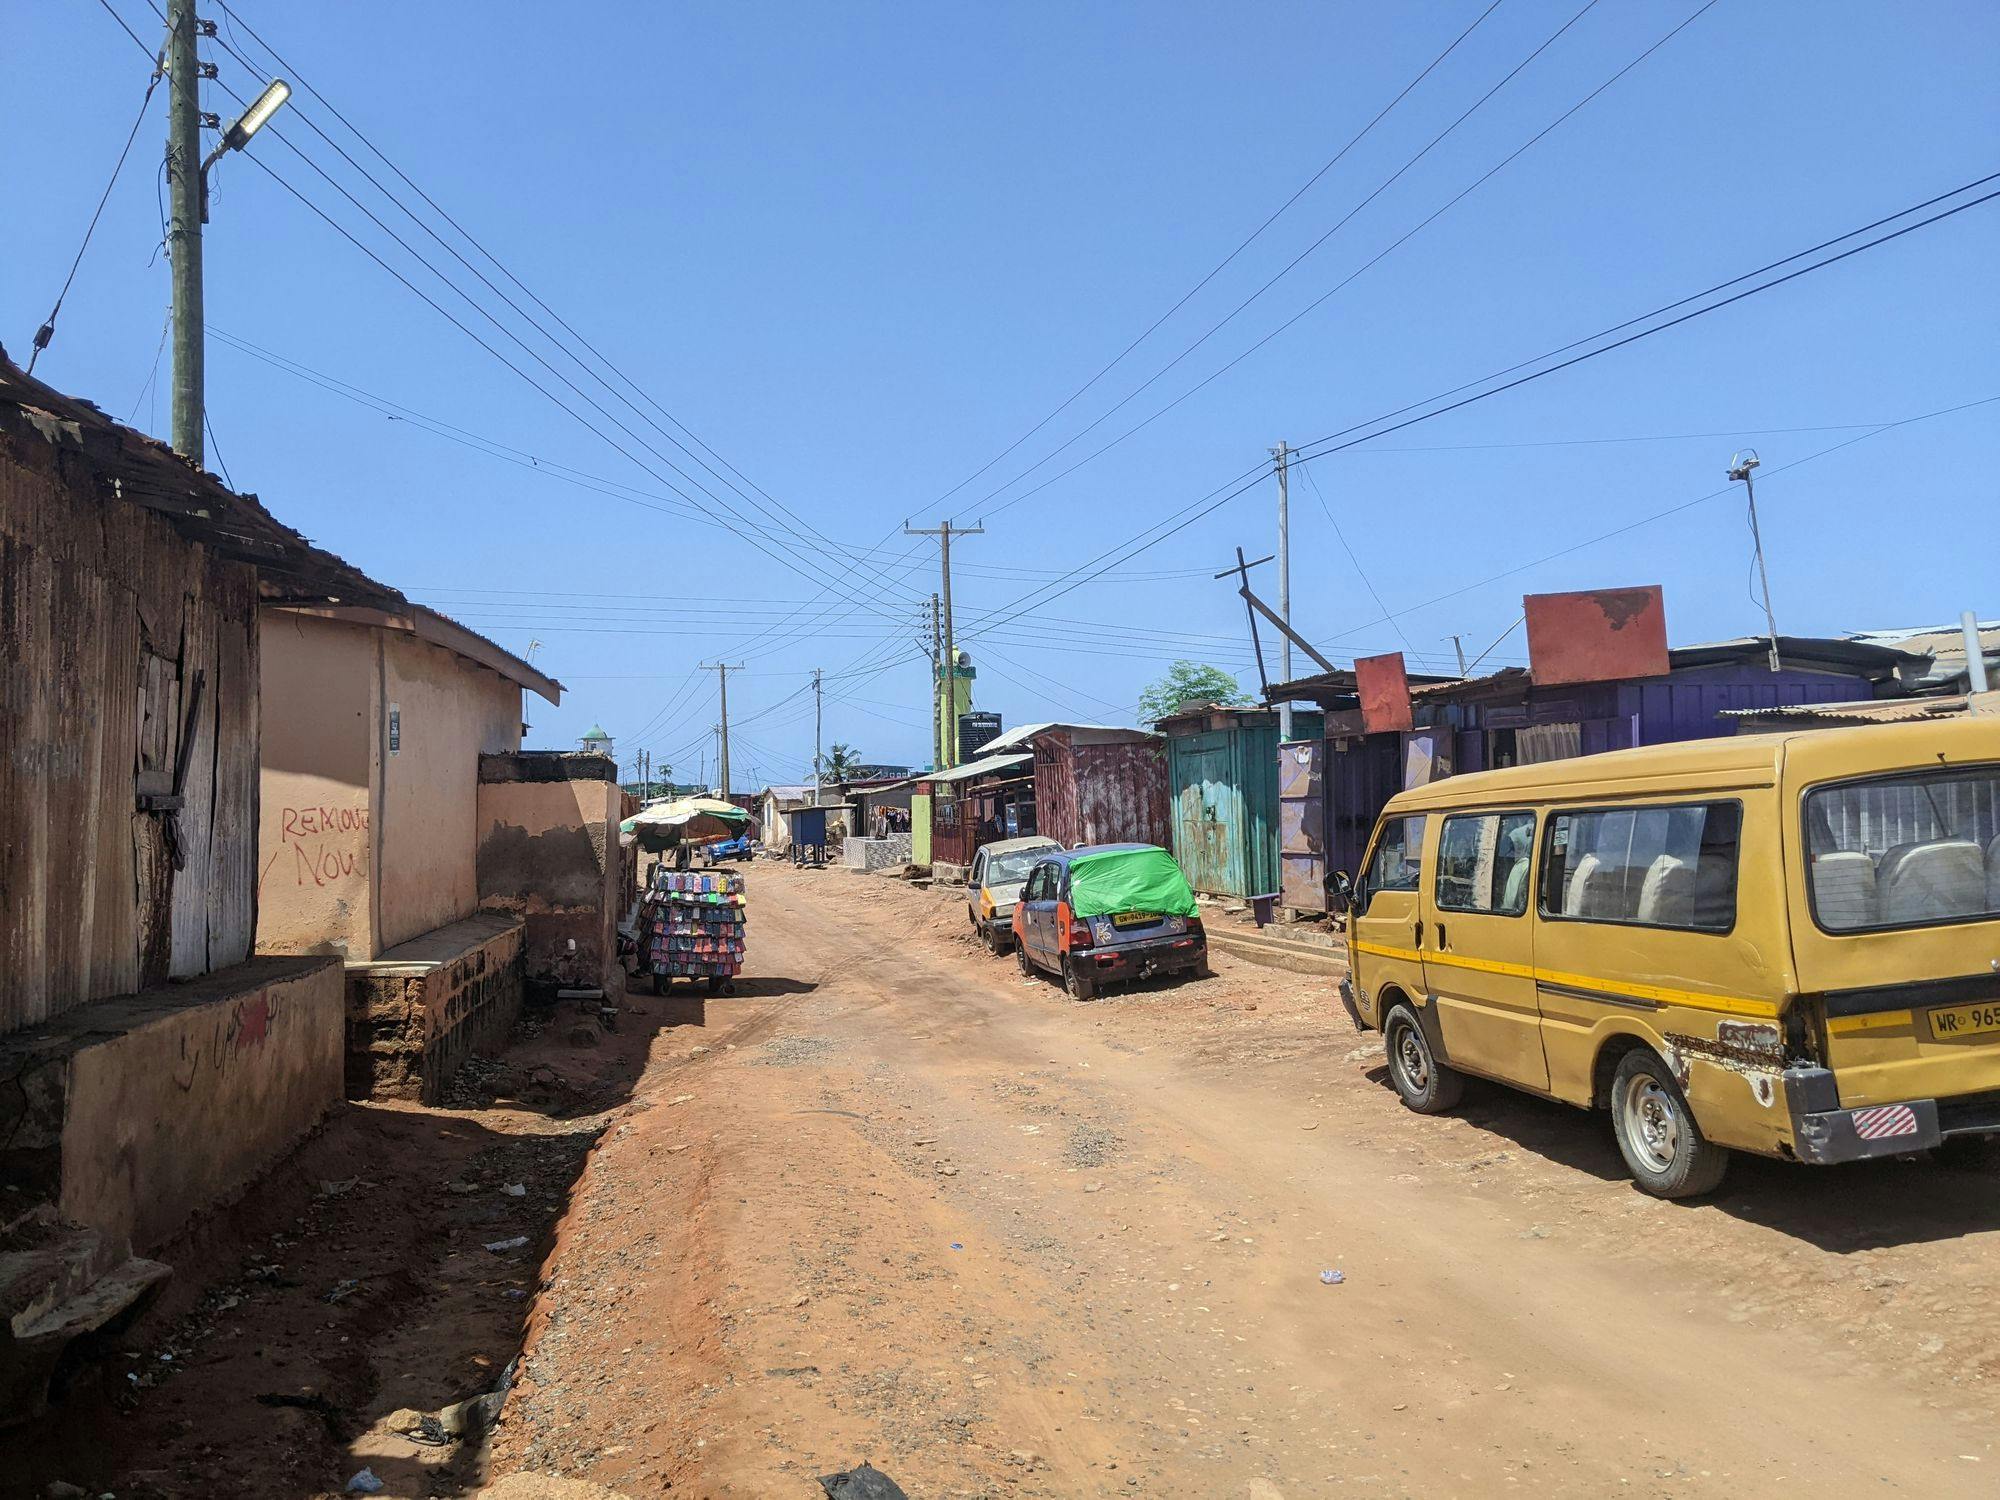 Figure 1. Pictured here is a street in Ablekuma, in the Dansoman district of Accra, Ghana. nLine’s SAIDI estimates for this region provide a picture of how the grid is serving this community. Data from many such communities can be aggregated to provide a comprehensive picture of system-wide grid performance. In this way, SAIDI values of varying spatial and temporal resolutions can give a utility key operational insights over time and space. At high resolutions — down to the individual distribution feeder level — SAIDI can help identify struggling feeders that would benefit from intervention, or well-performing feeders whose lessons can be applied elsewhere. At lower resolutions, SAIDI can reveal, for example, how large-scale infrastructure upgrades or widespread climate impacts are affecting grid service. (Photo credit: Molly Hickman)